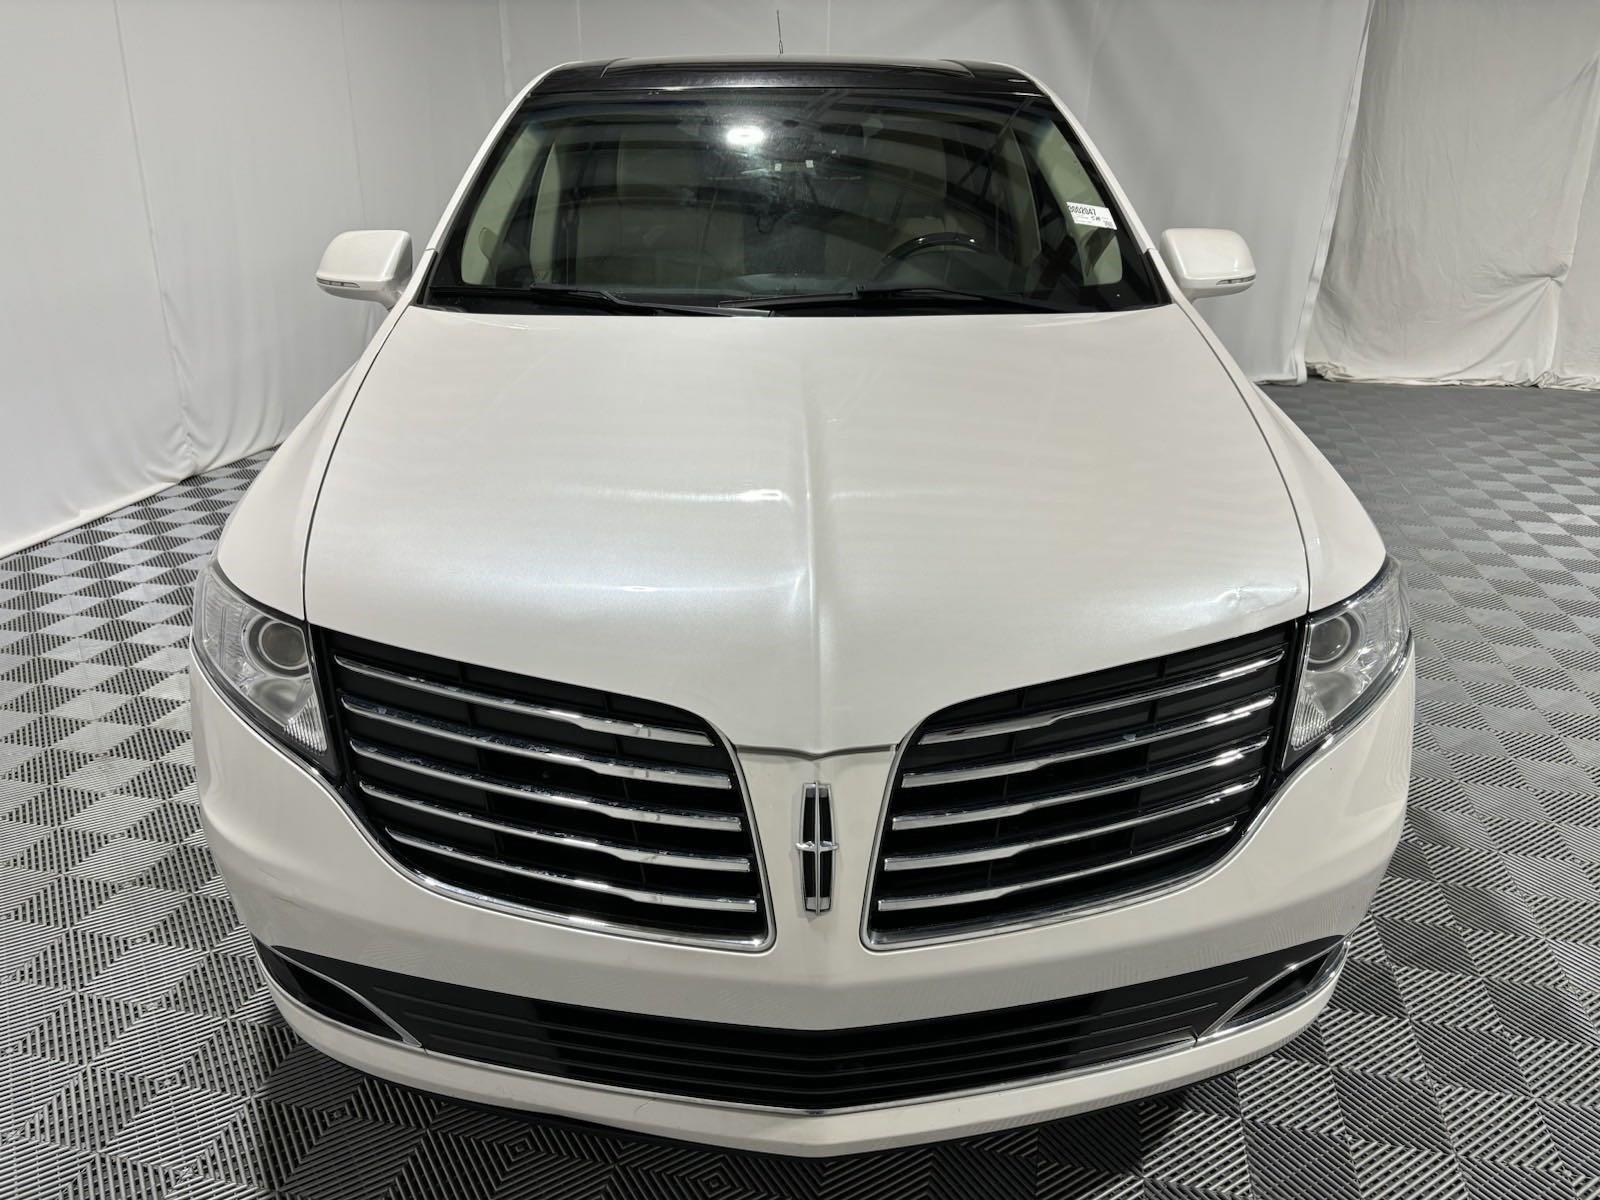 Used 2019 Lincoln MKT Standard Sport Utility for sale in St Joseph MO